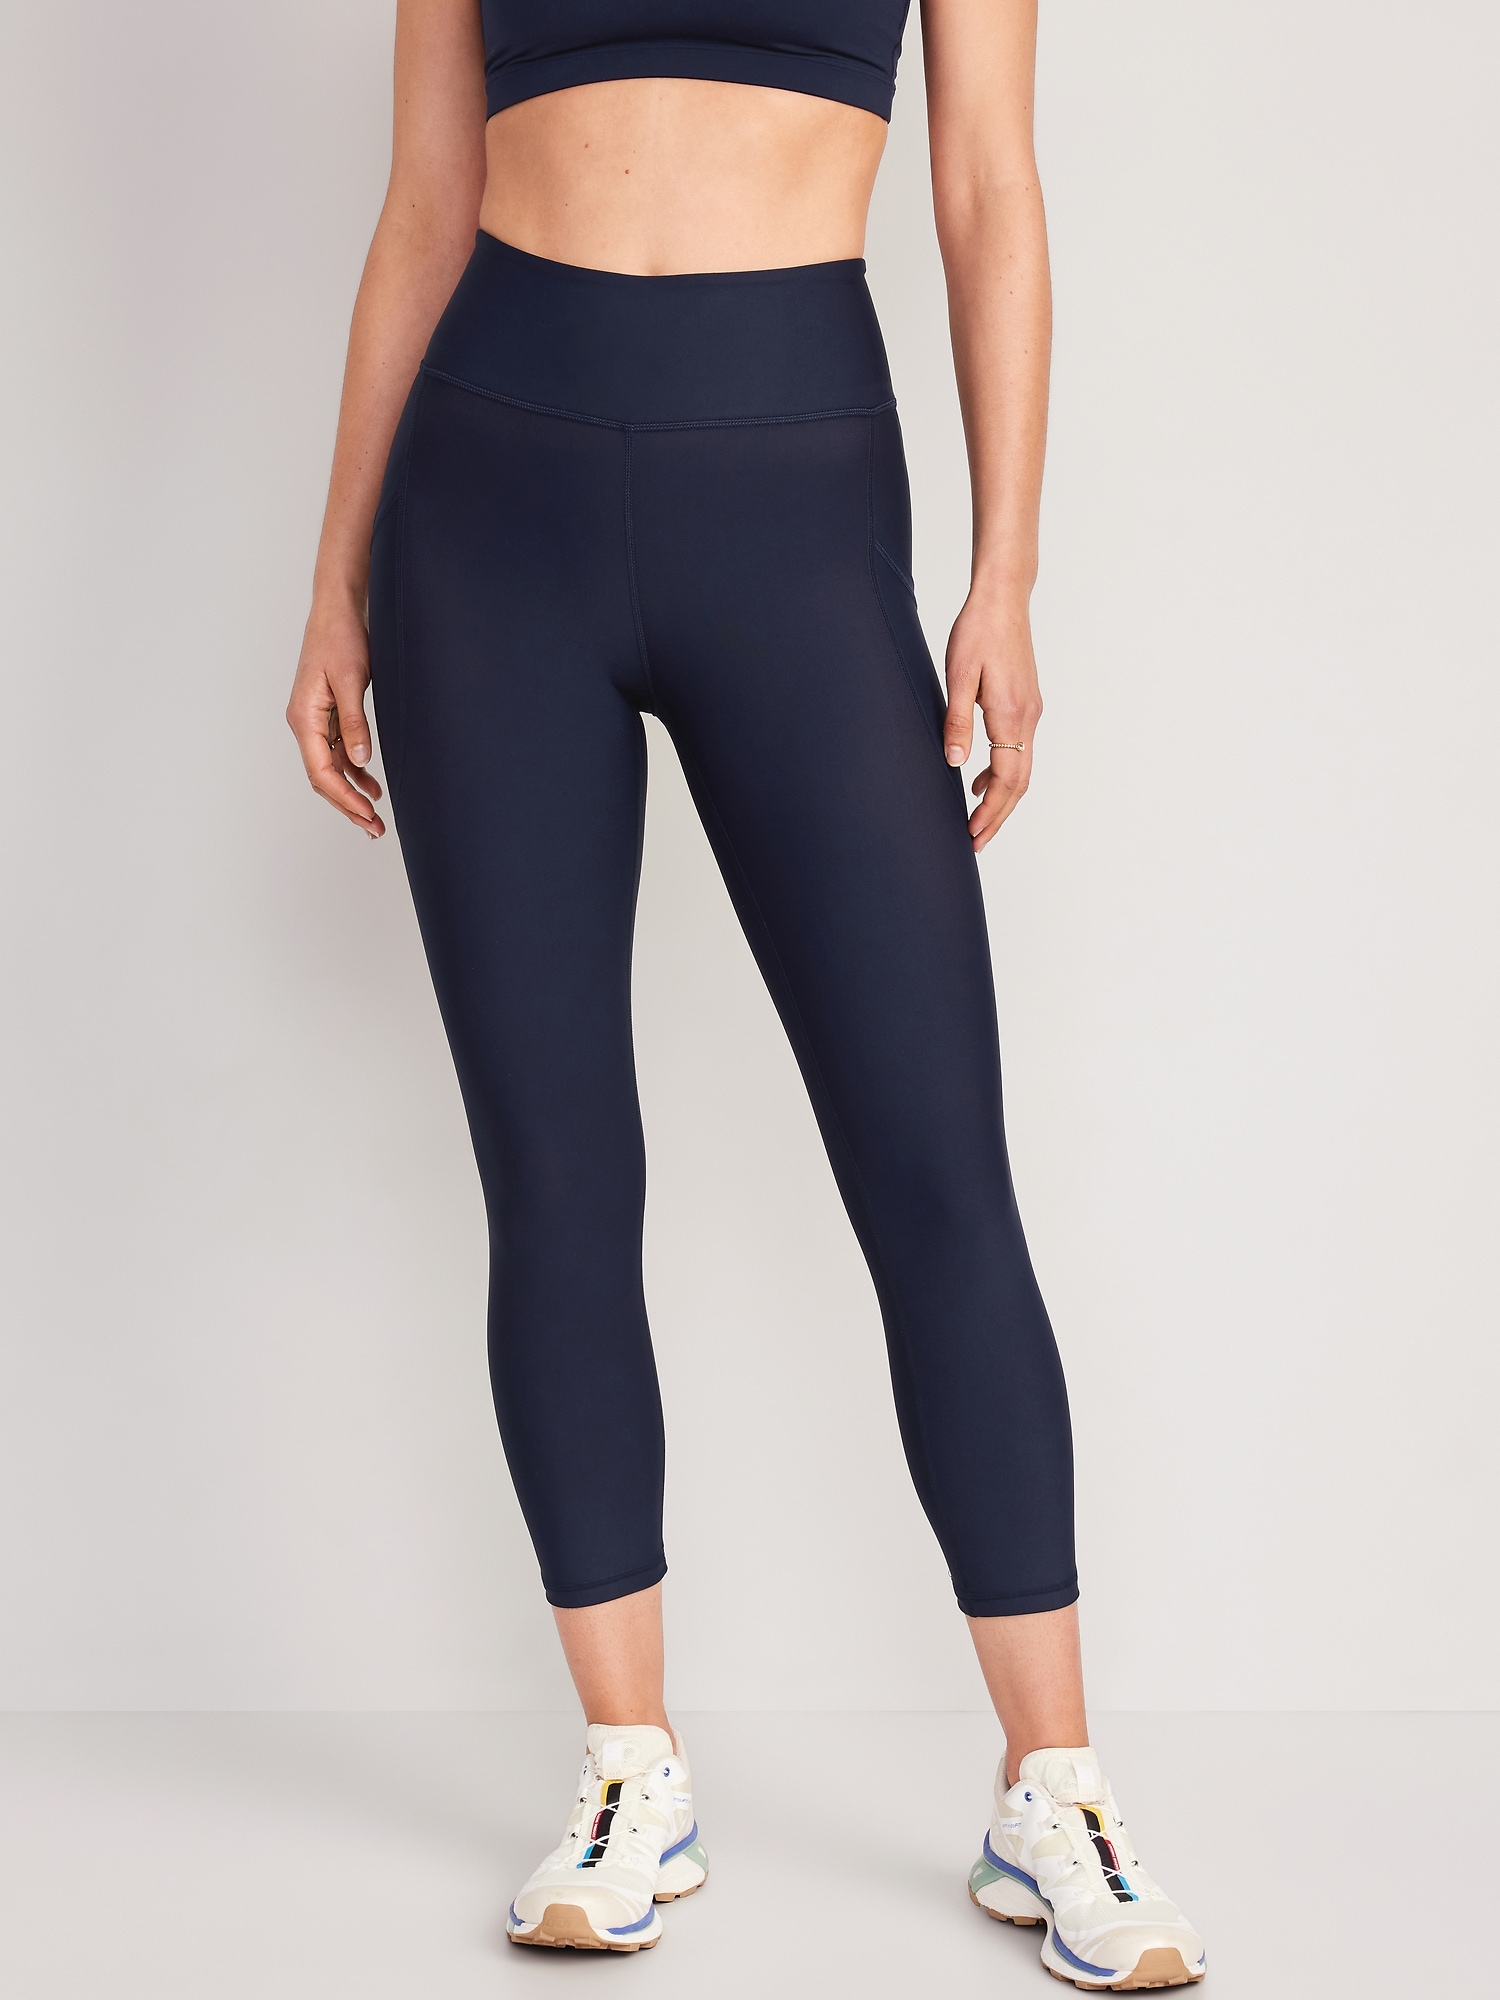 High-Waisted PowerSoft Crop Leggings for Women, Old Navy